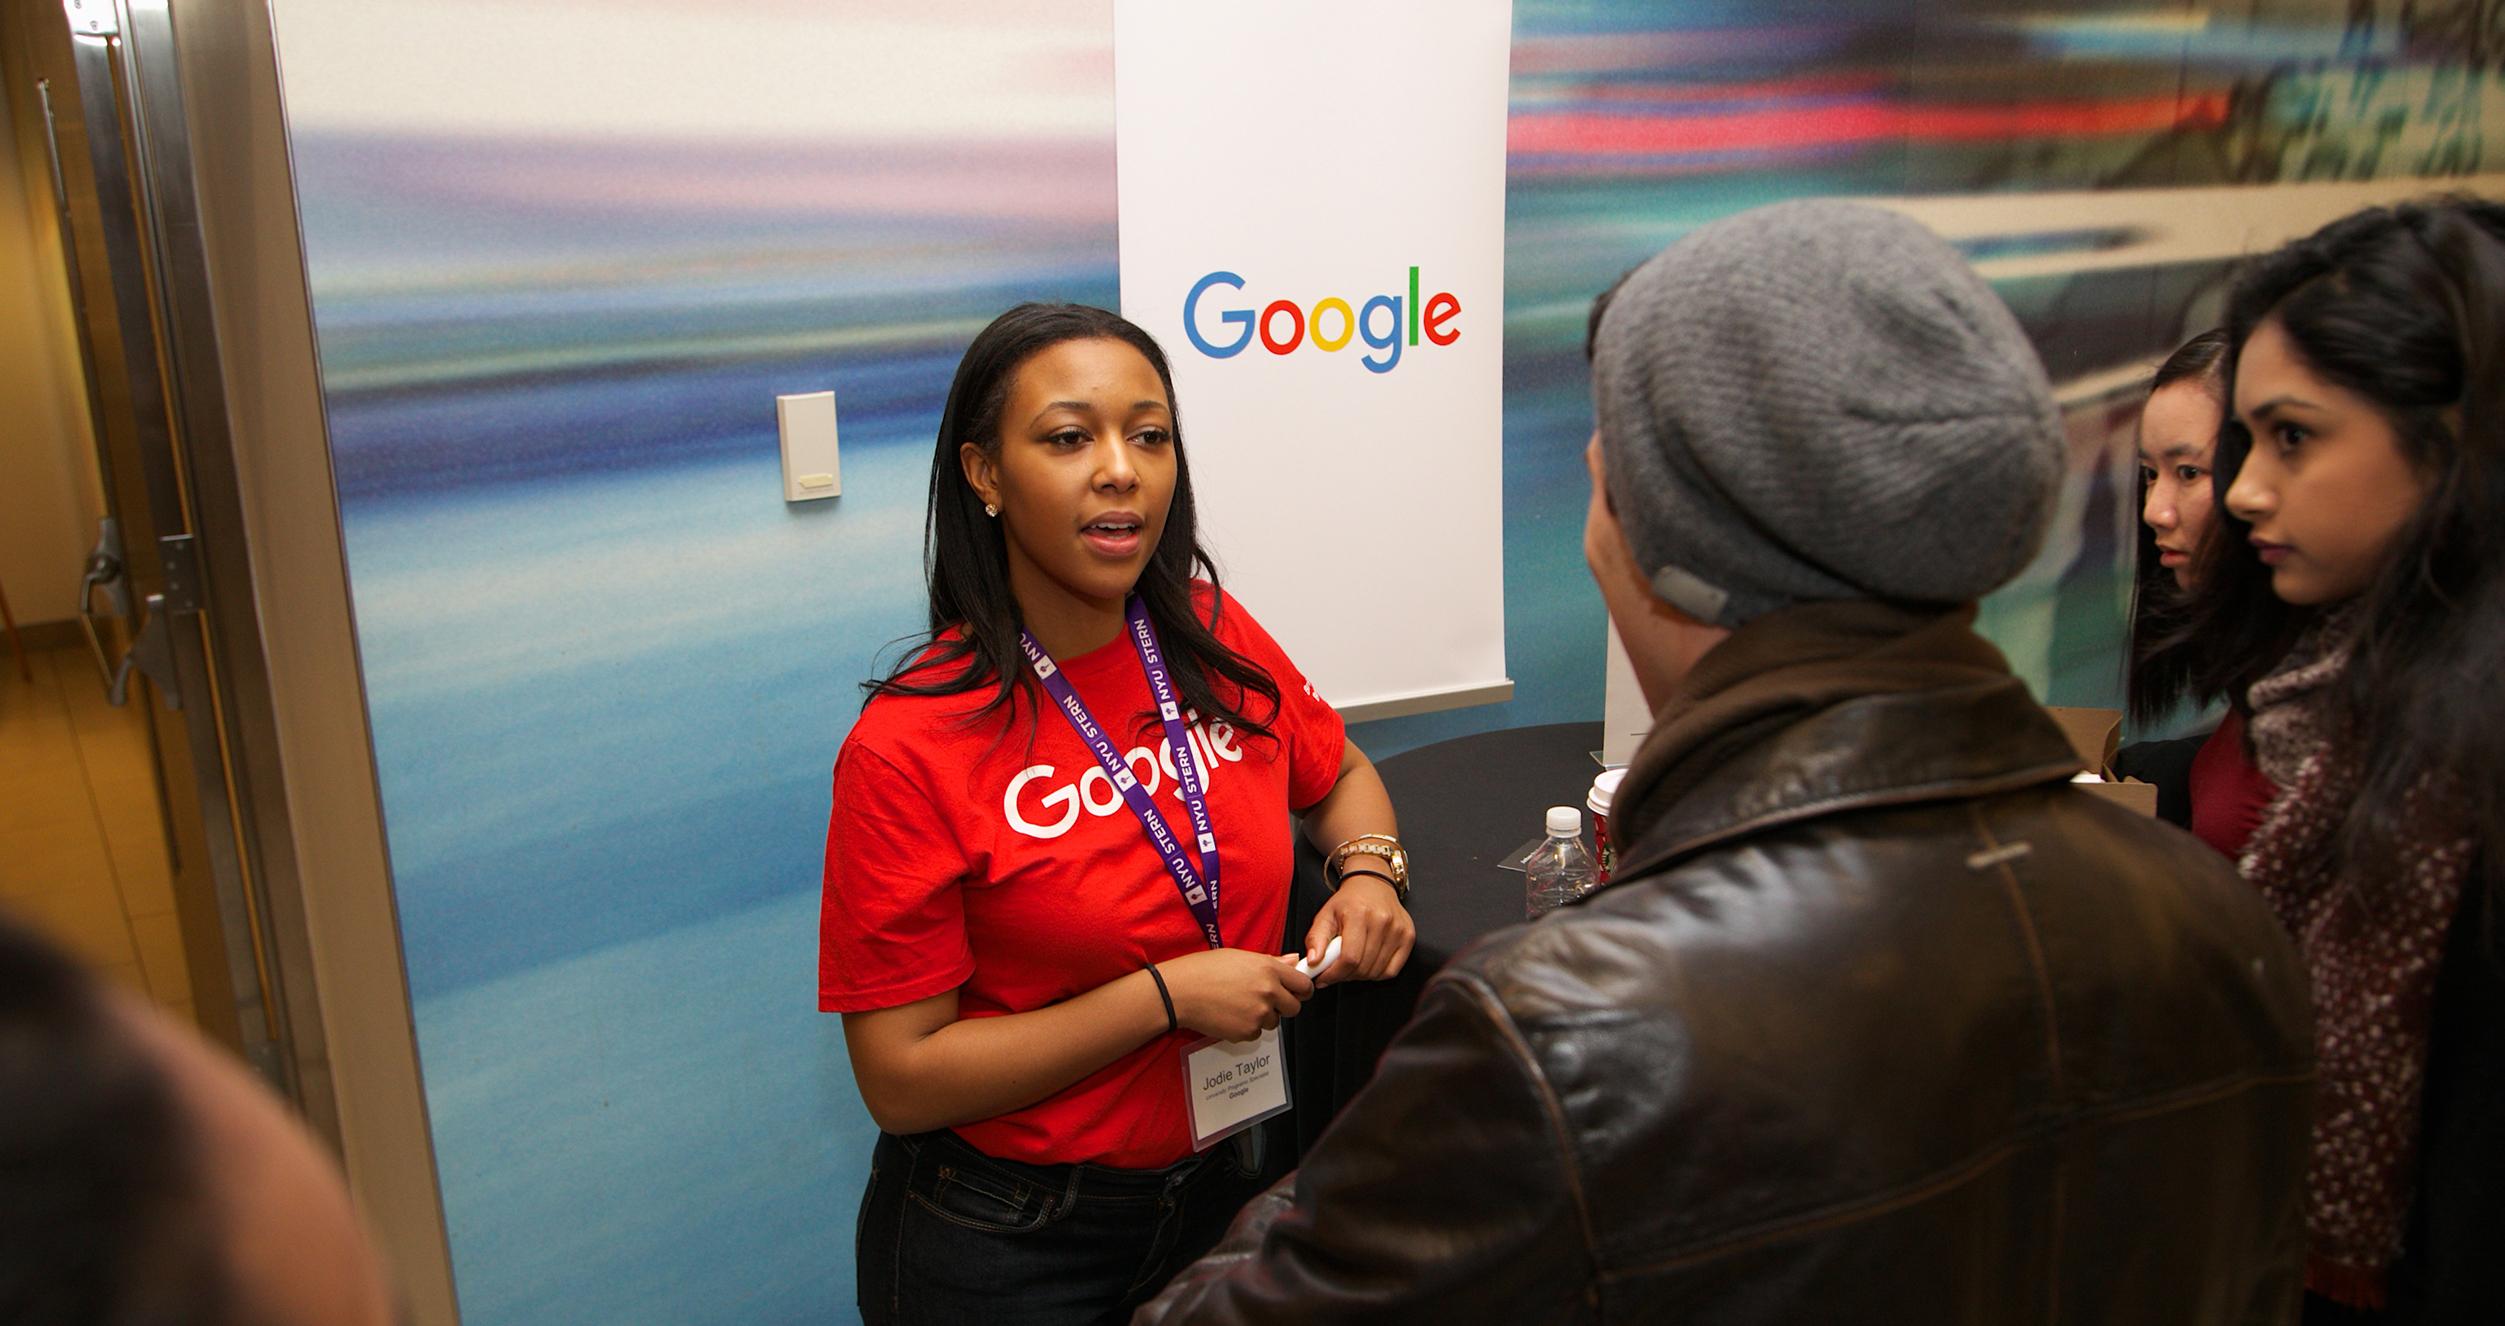 Google recruiter speaking with students at Stern Exchange event